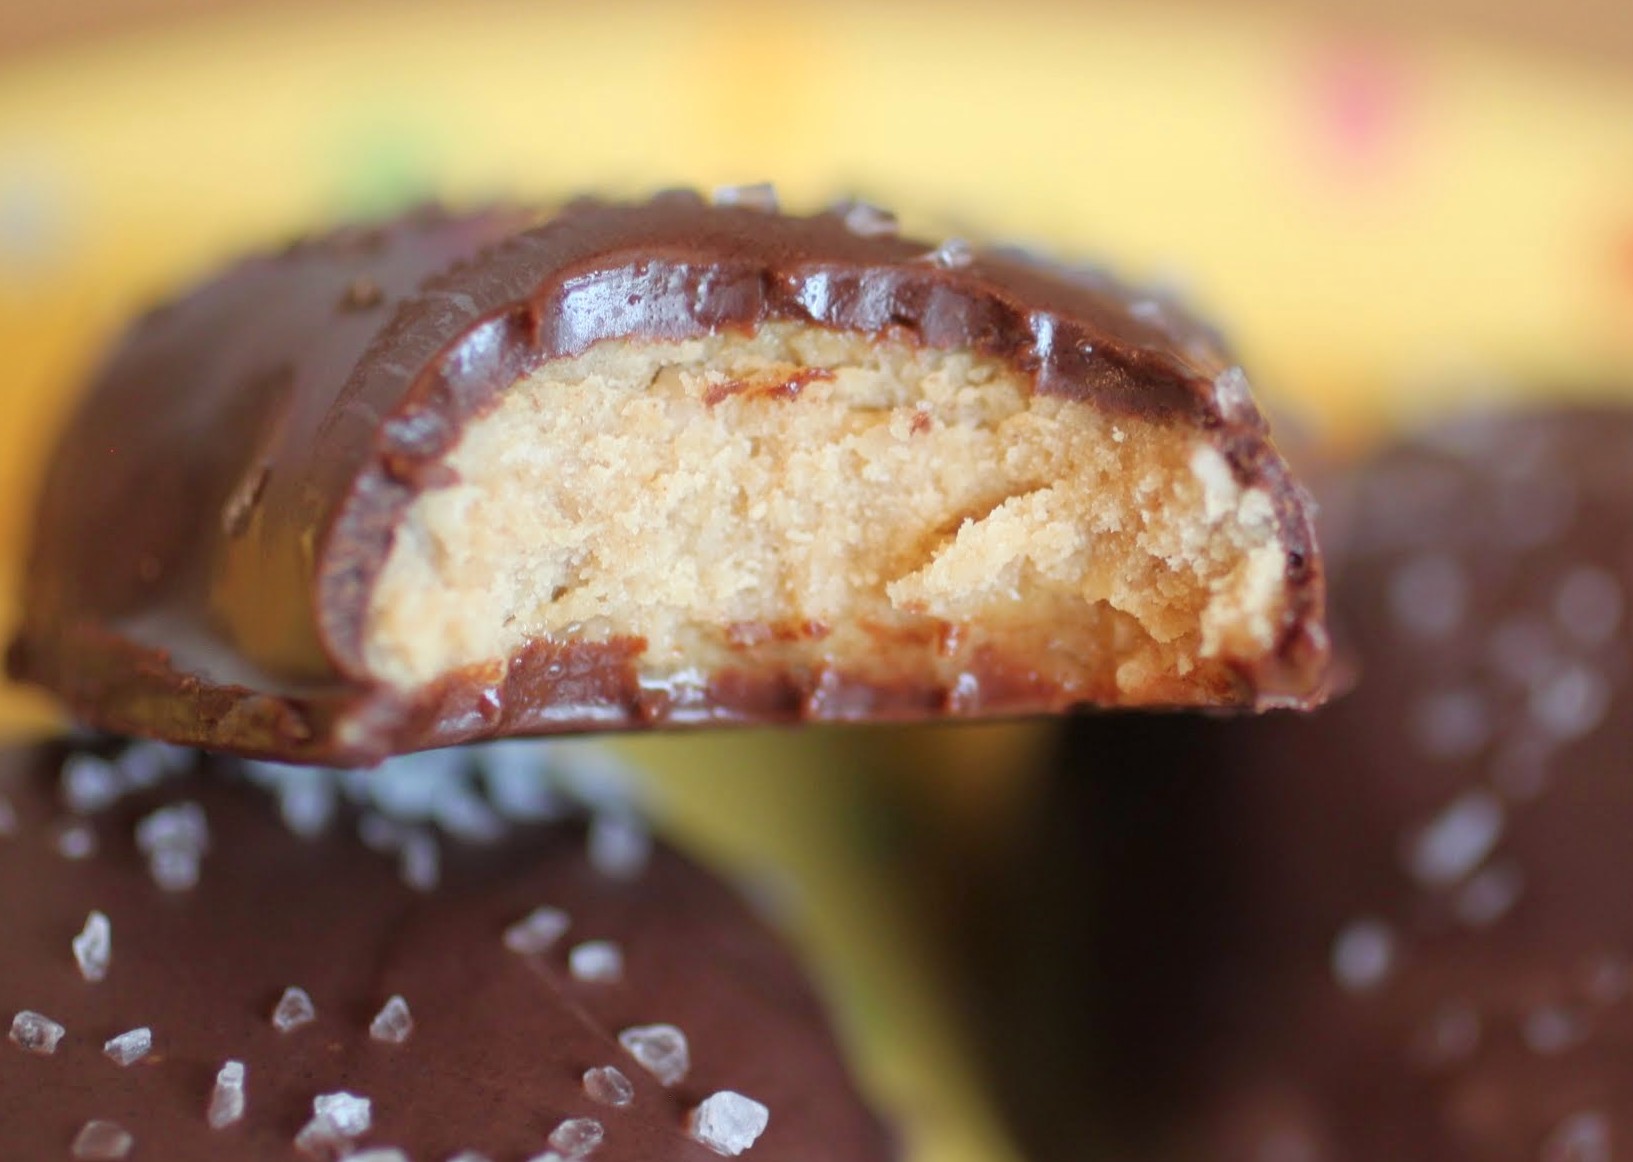 Salted Chocolate Peanut Butter Eggs